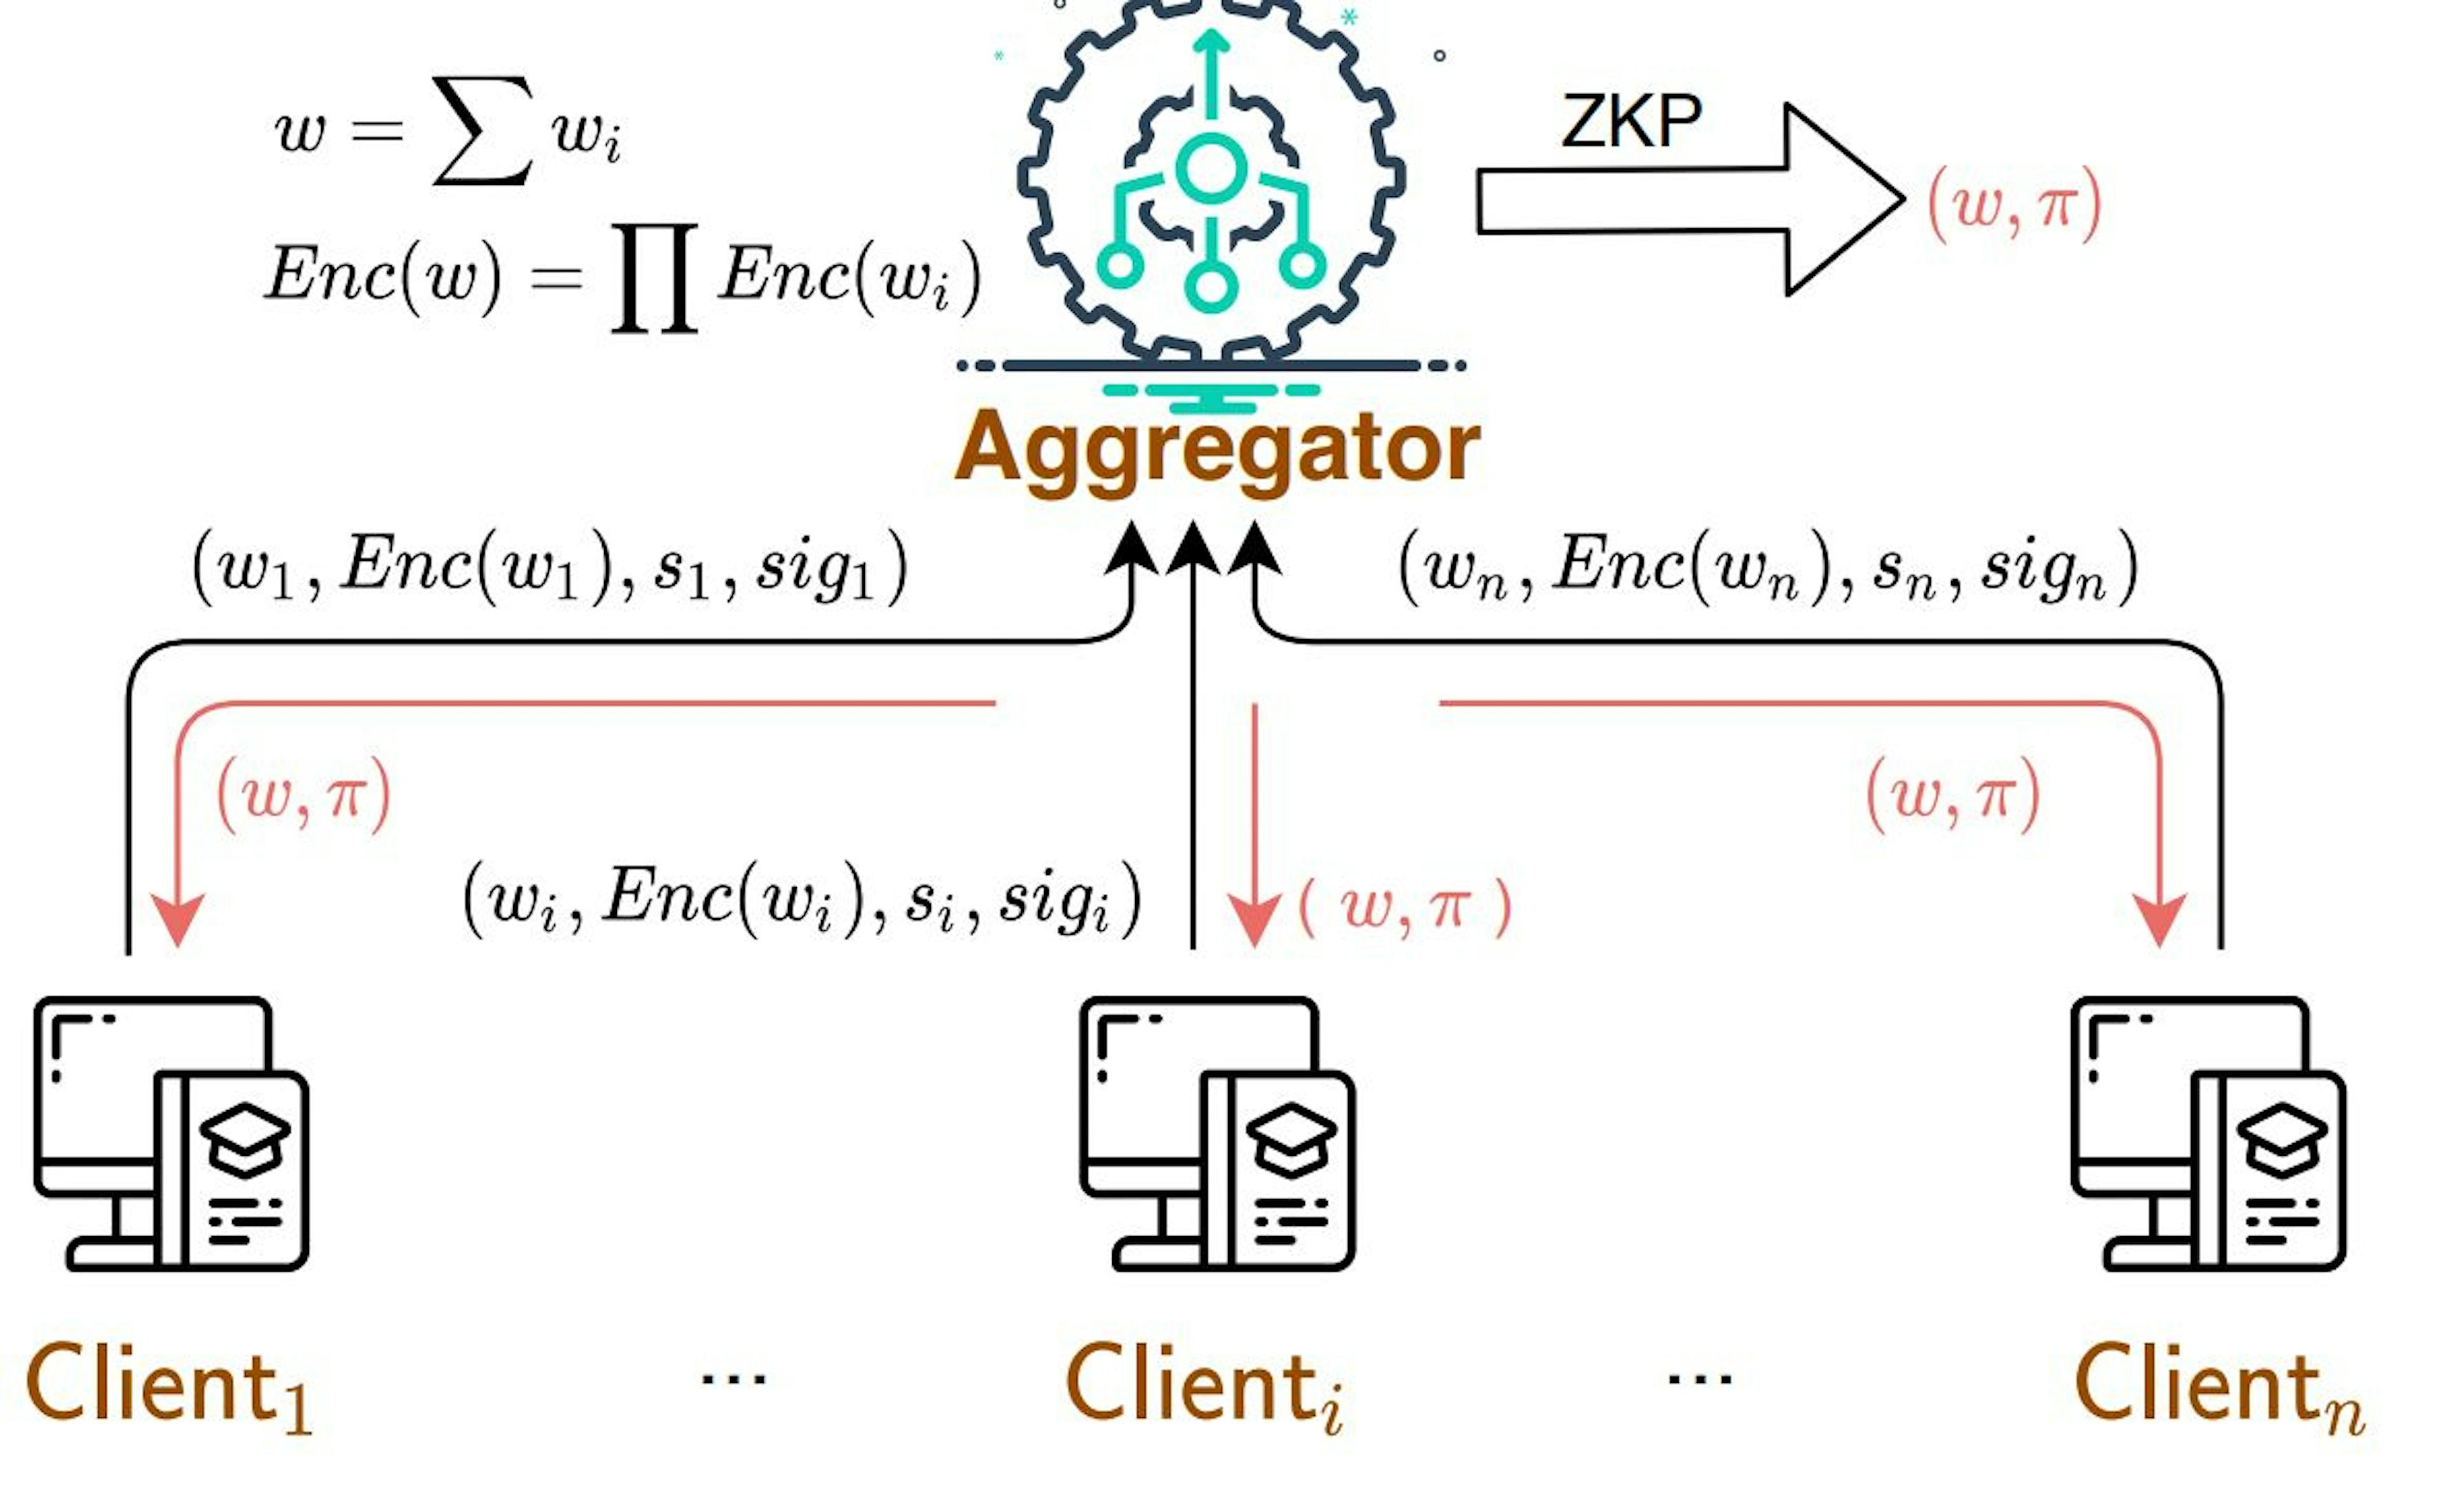  ZKP Fig. 1: Overview of zkFL system. During each round, the clients send their local model update wi , the encrypted model update Enc(wi), a chosen random number si , and their signature sigi to the aggregator. The aggregator generates the aggregated model update w and leverages zero-knowledge proofs (ZKPs) to generate a proof π, and the clients will verify the proof to ensure that the training model updates are correctly aggregated. zkFL guarantees the integrity of the data computed by the aggregator, and enhances security and trust in the collaborative FL setting.